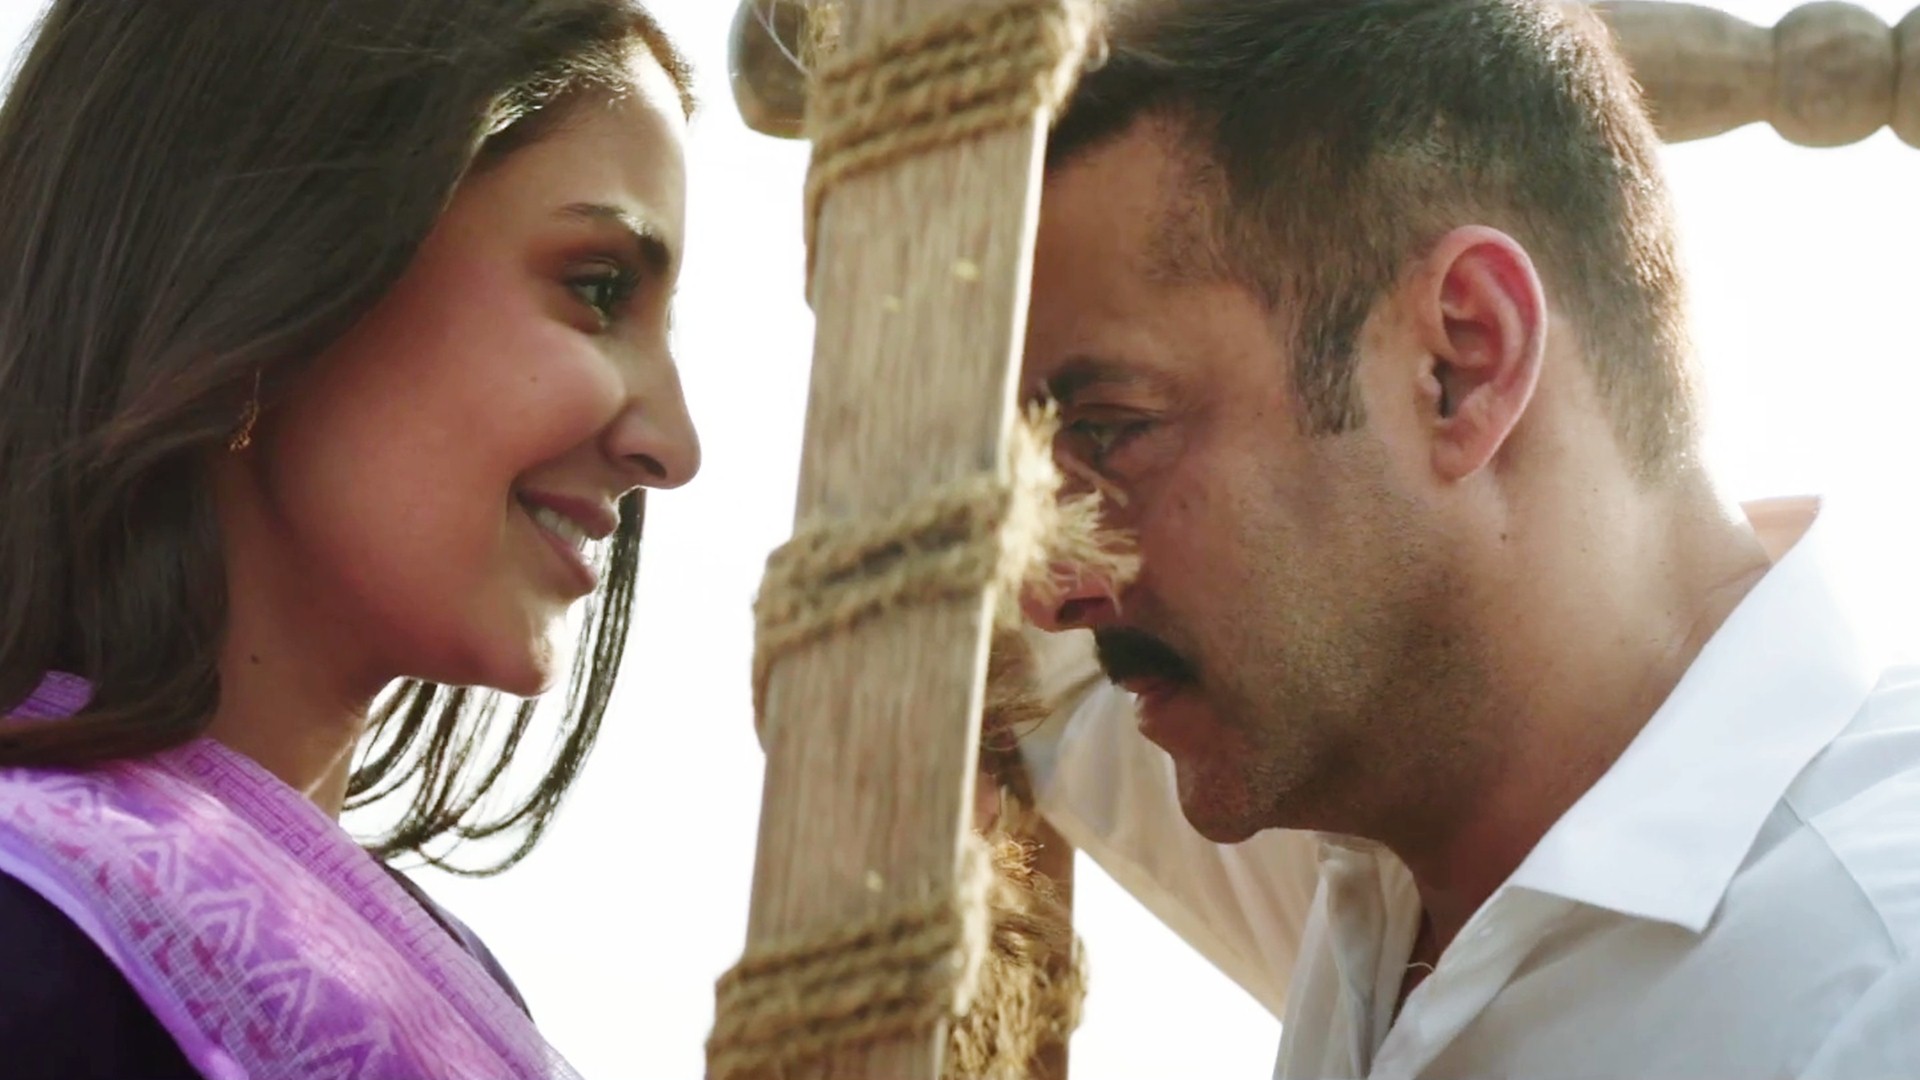 Salman-Anushka Duo to rock the Bollywood with “Sultan” | BOTY